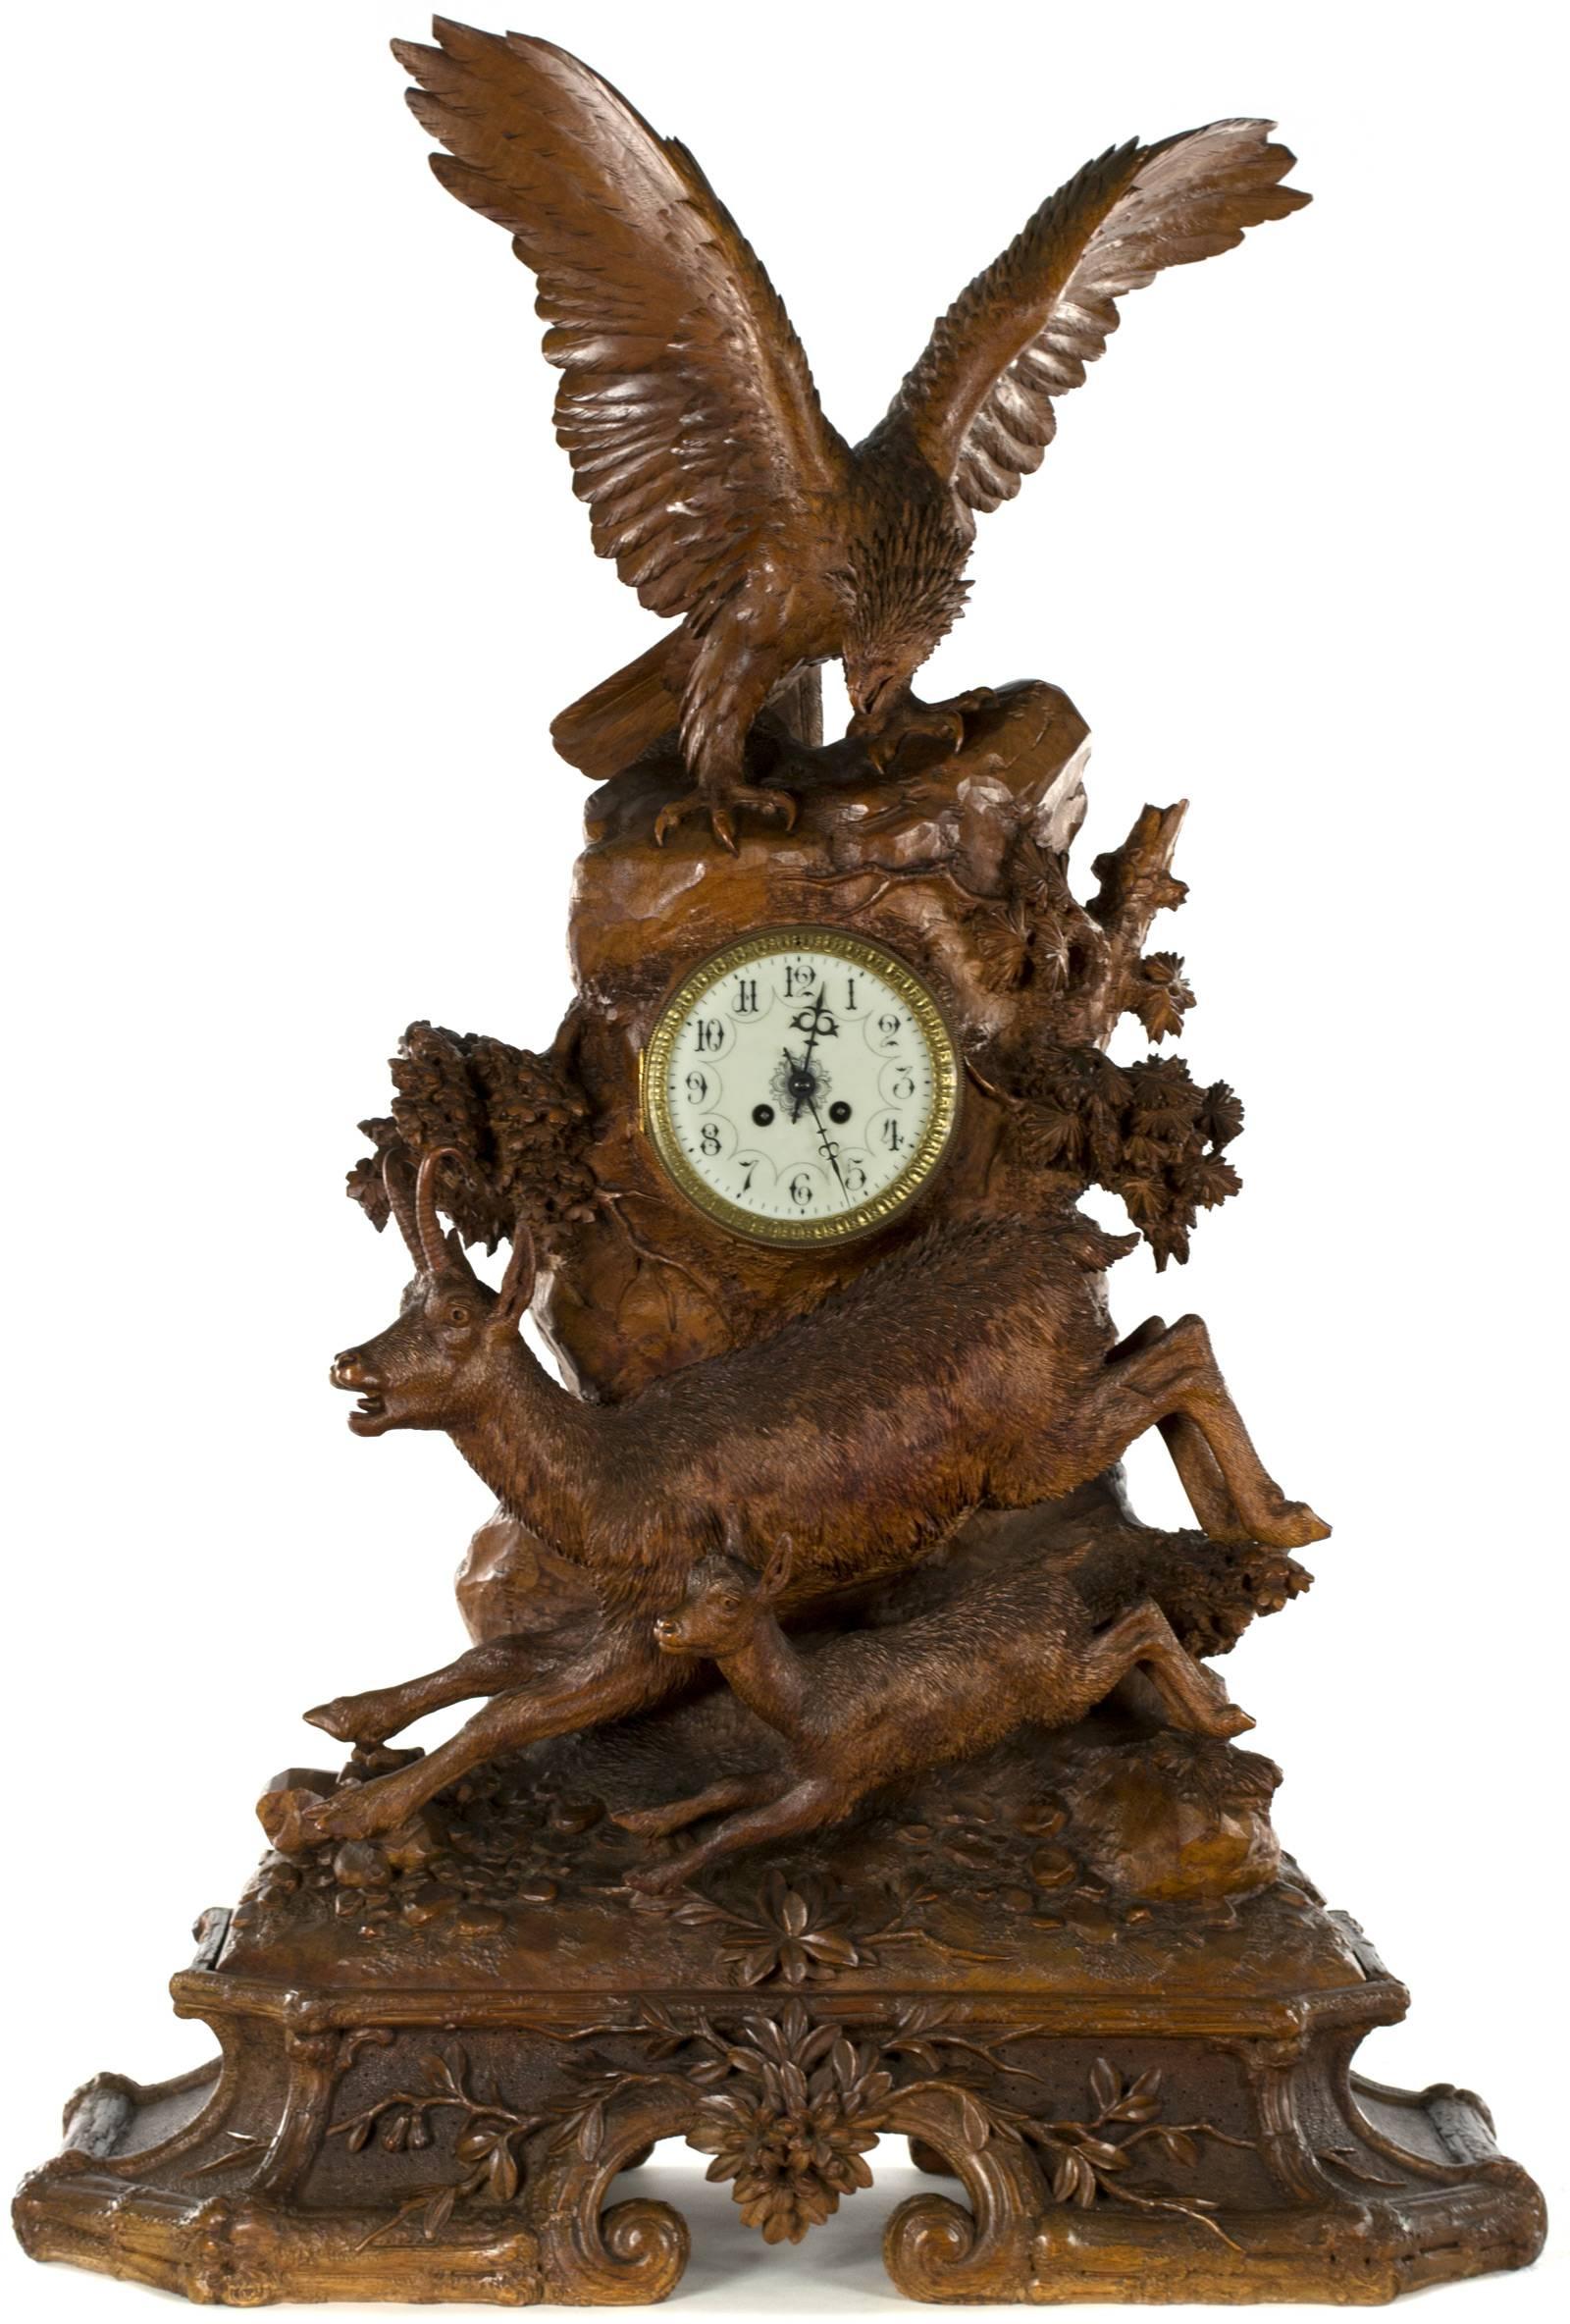 A very fine, large linden wood Black Forest mantel clock with a carved figural group of two full-relief jumping chamois below the clock face, which itself is surmounted by a large eagle, with its wings spread the width of the clock. The fine quality